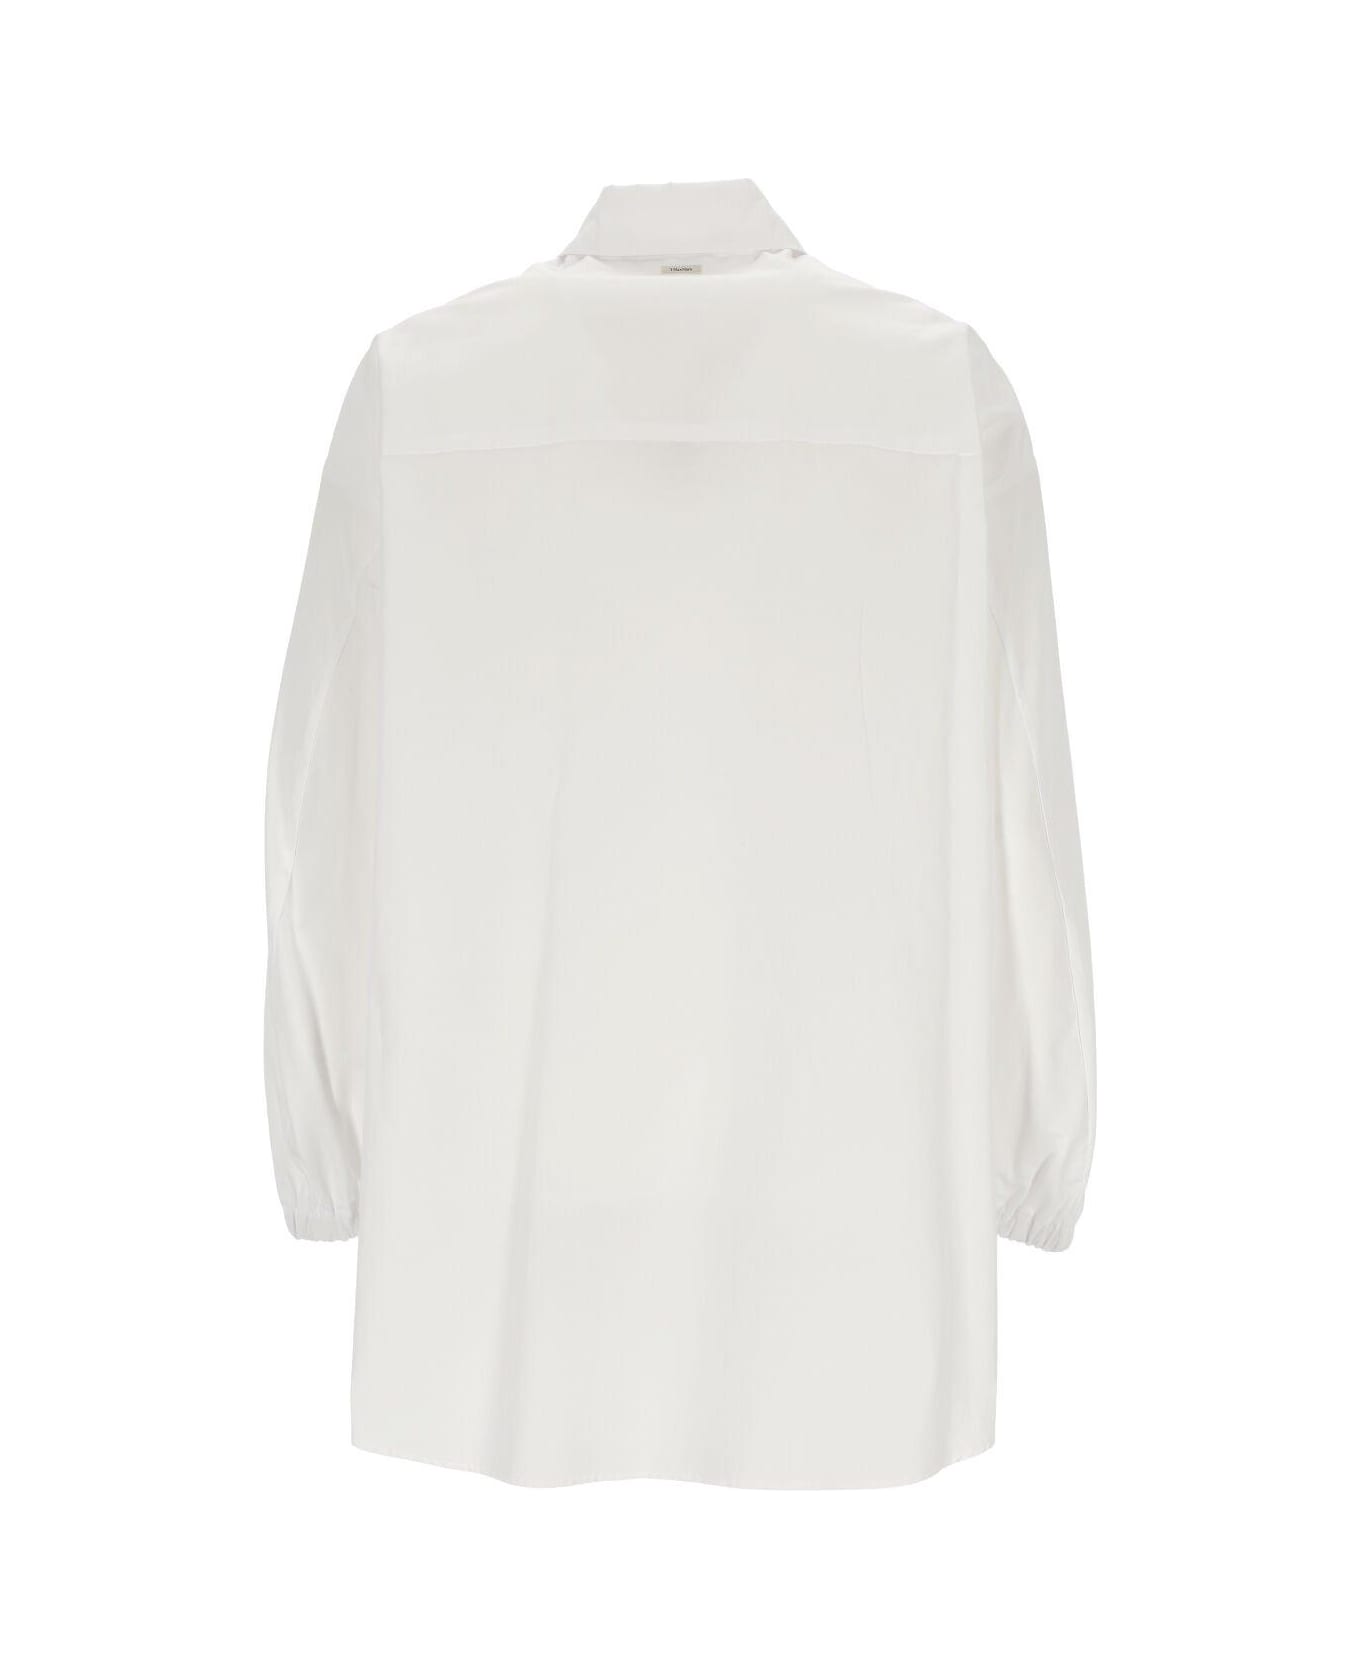 'S Max Mara Buttoned Long-sleeved Shirt - White